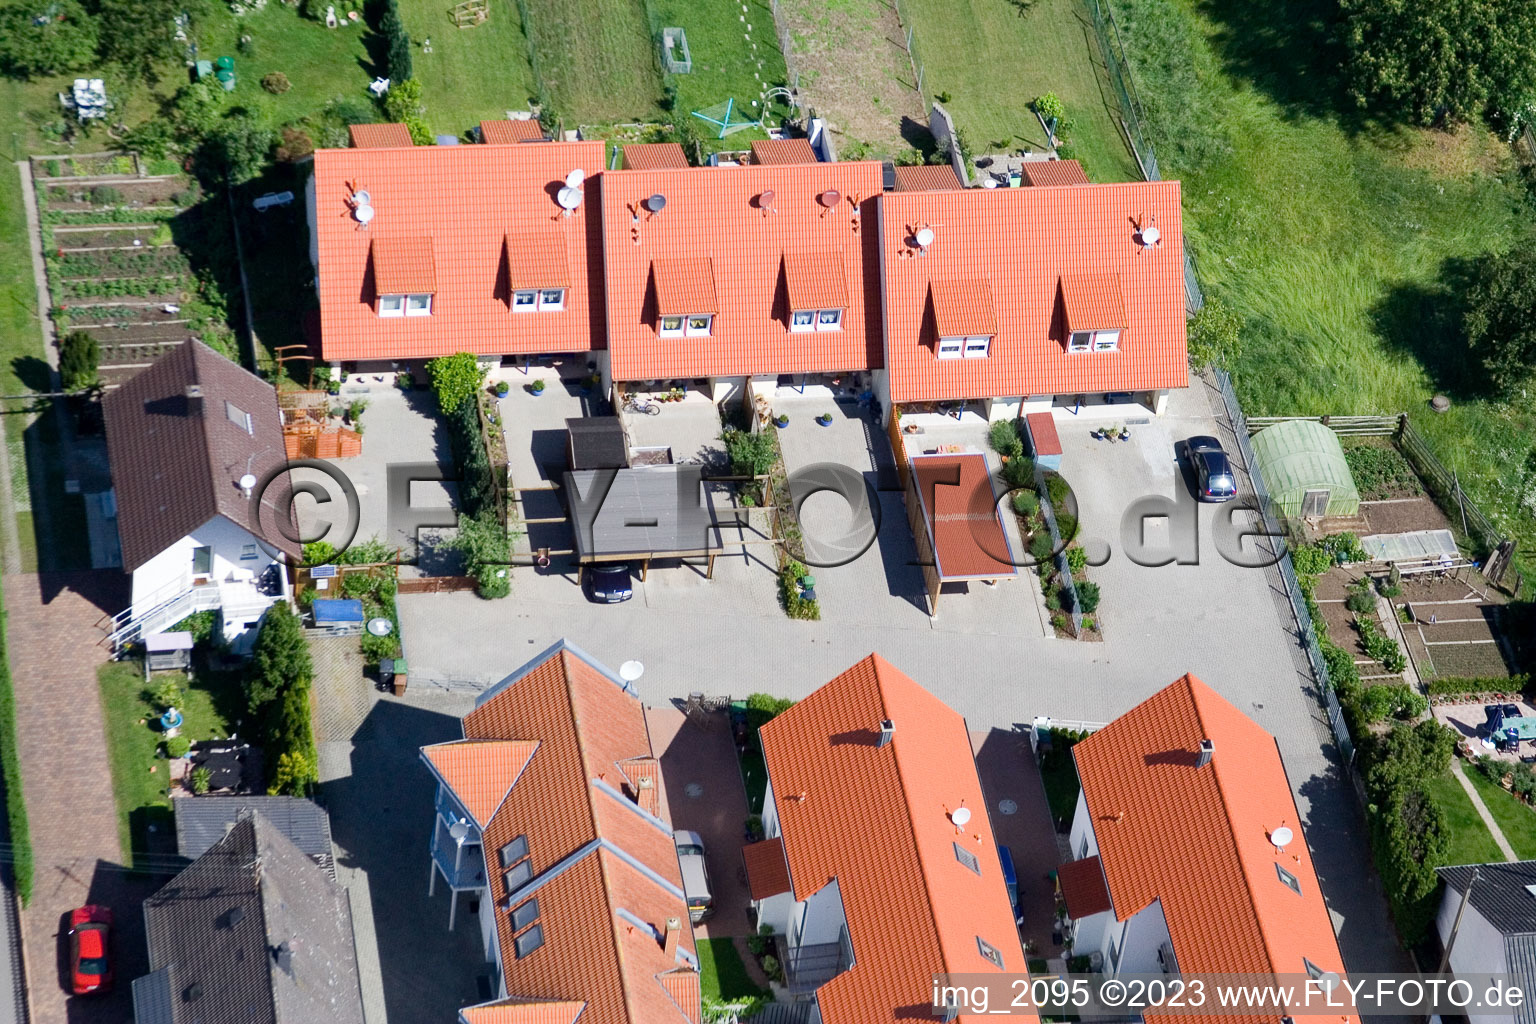 Drone image of District Minderslachen in Kandel in the state Rhineland-Palatinate, Germany